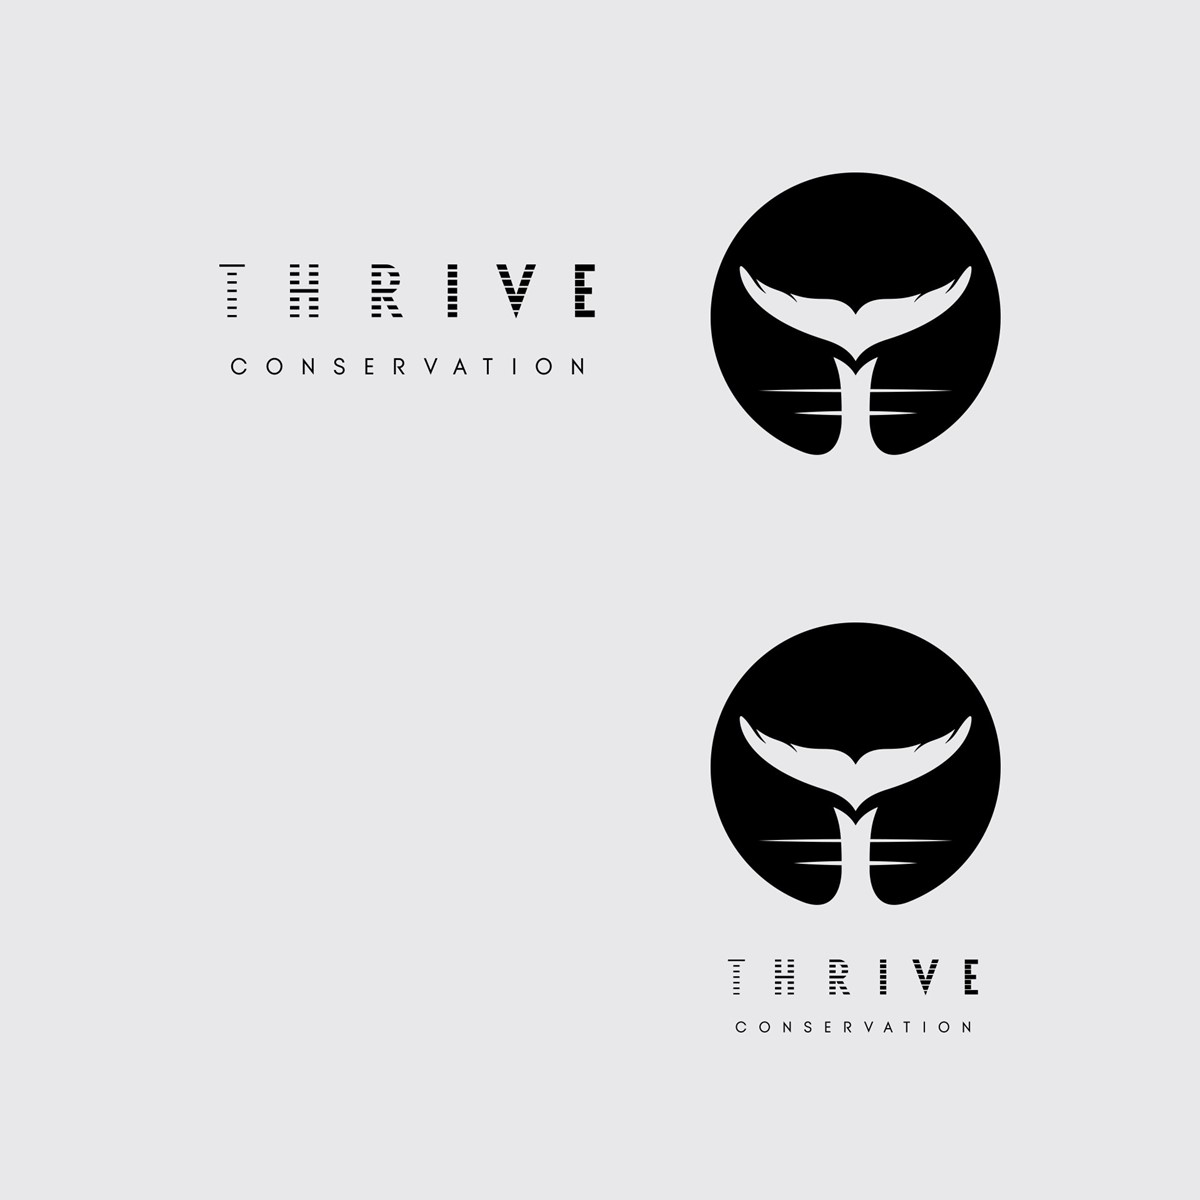 Thrive Conservation logo lock-ups – detailed versions. Brand identity design by Superfried.